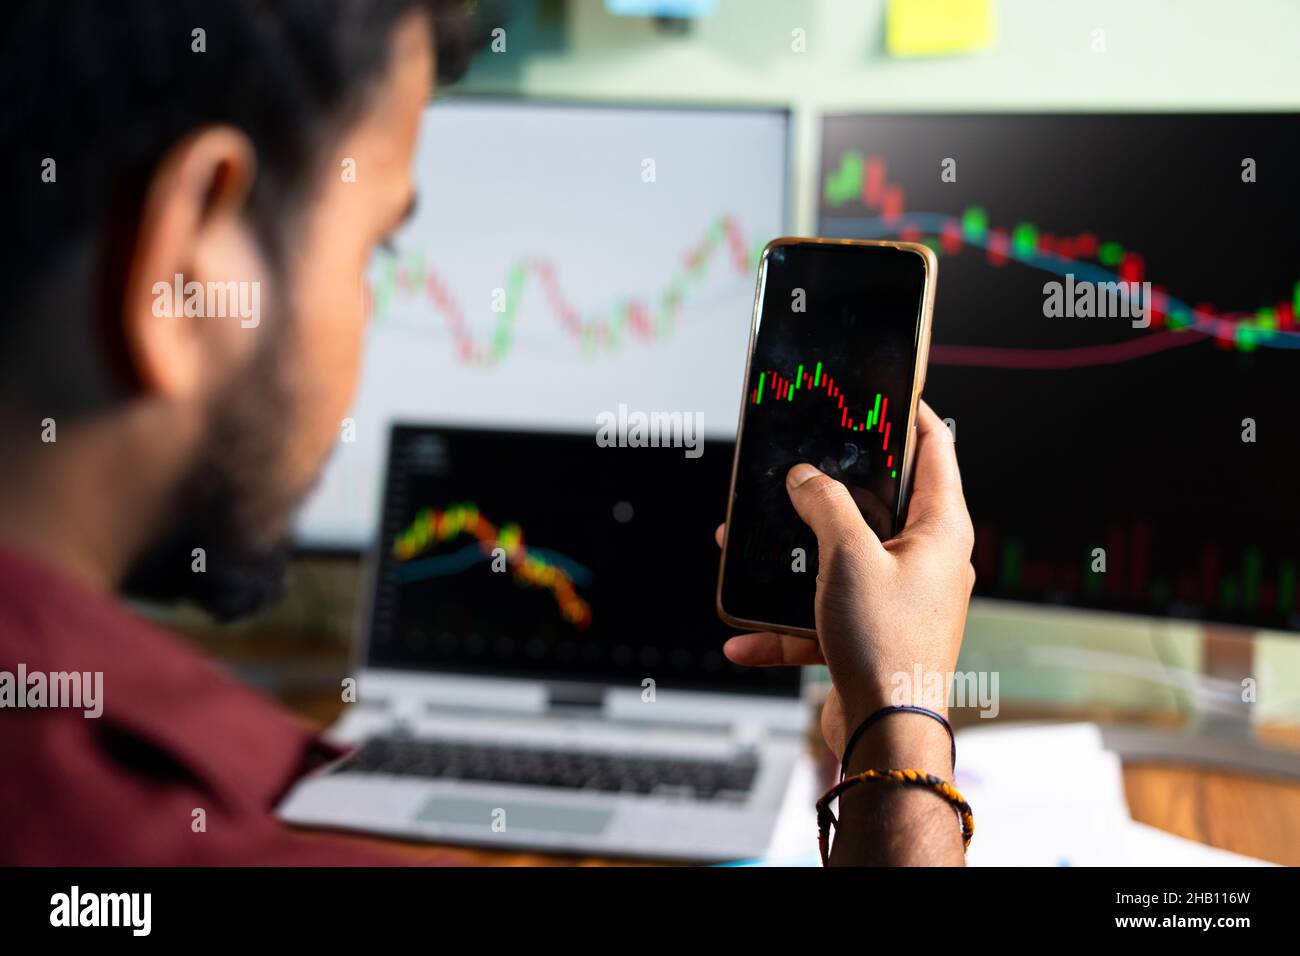 selective focus on hand, trader watching stock market candlestick patterns - concept of Investing money on shares using technical analysis, trading or Stock Photo